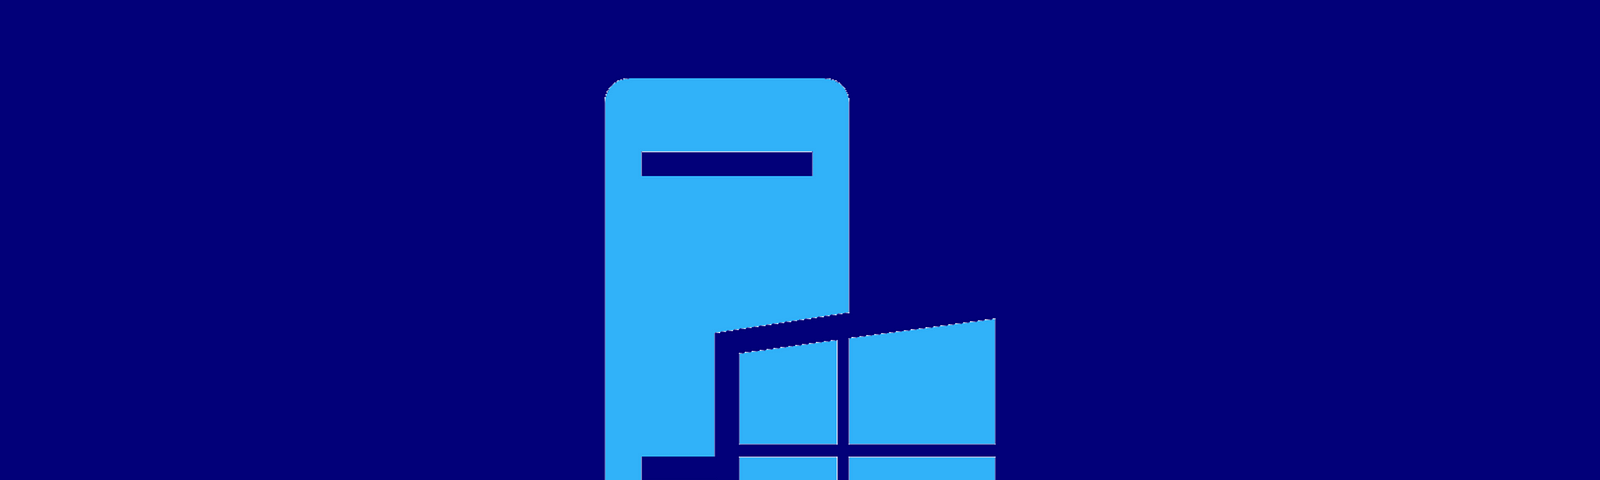 Certificate authority Server and windows logo on a blue background